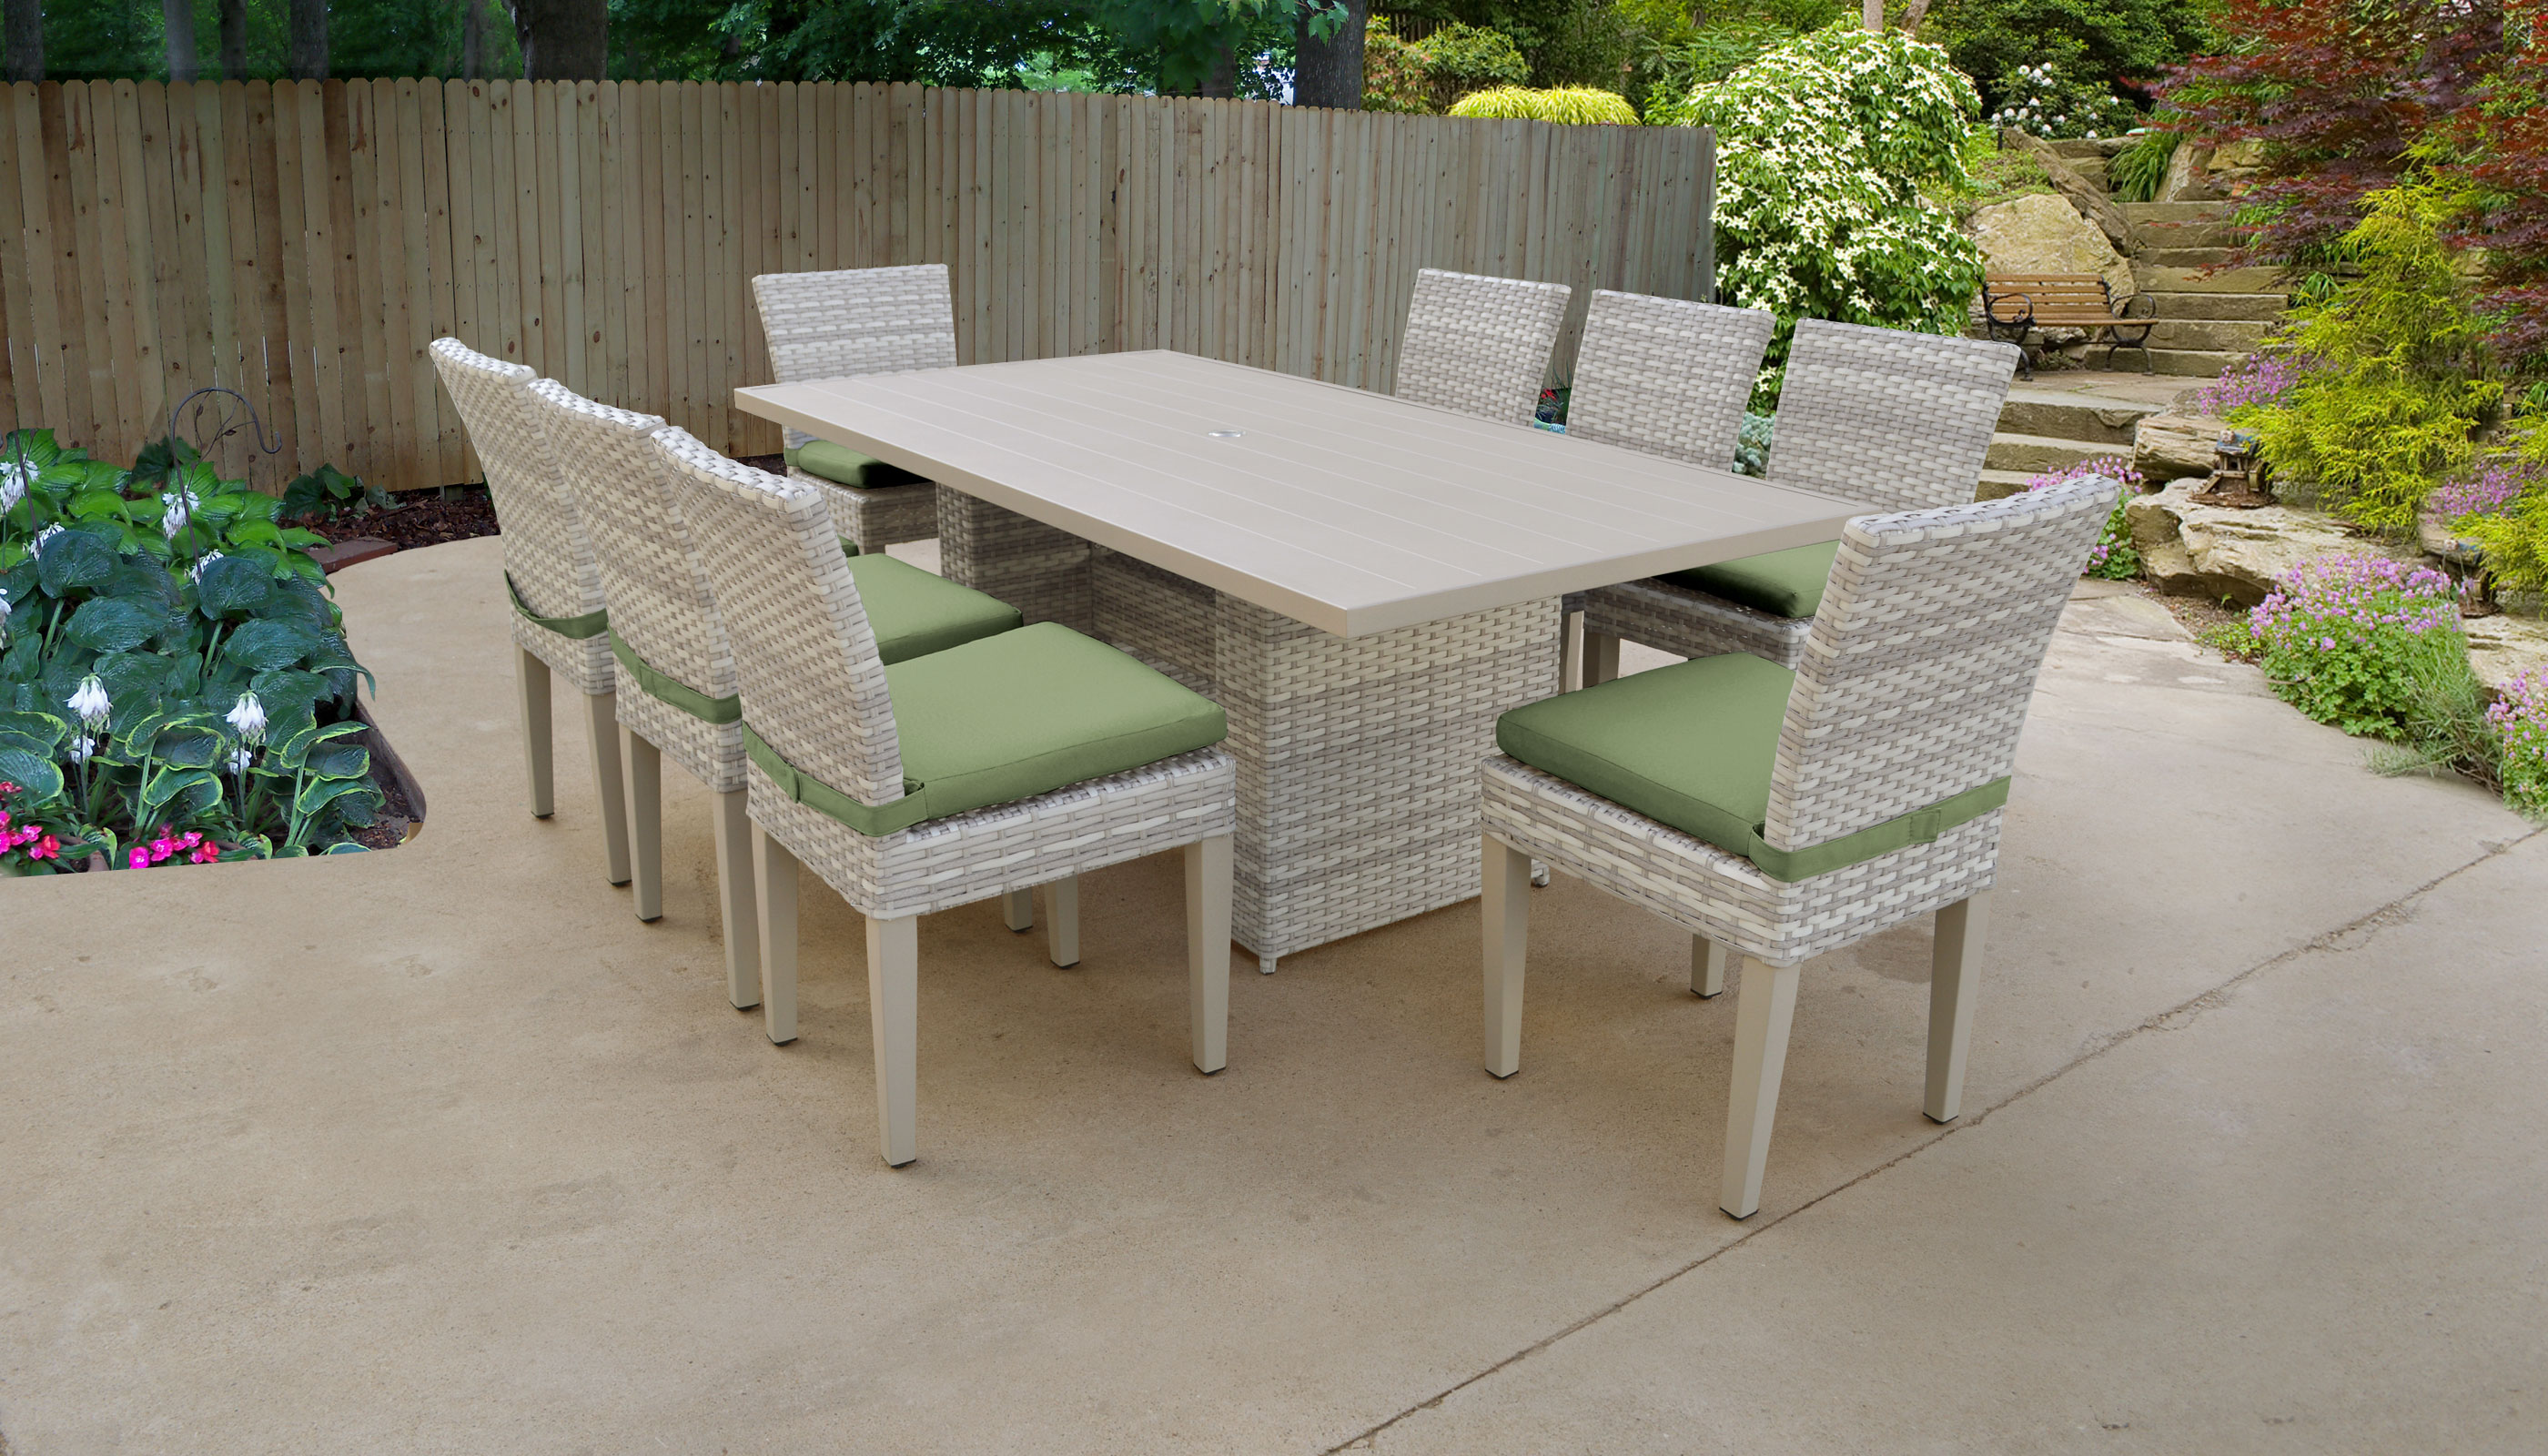 Outdoor Wicker Patio Dining Sets, Tkc Fairmont 7 Piece Counter Height Outdoor Dining Table And Chairs